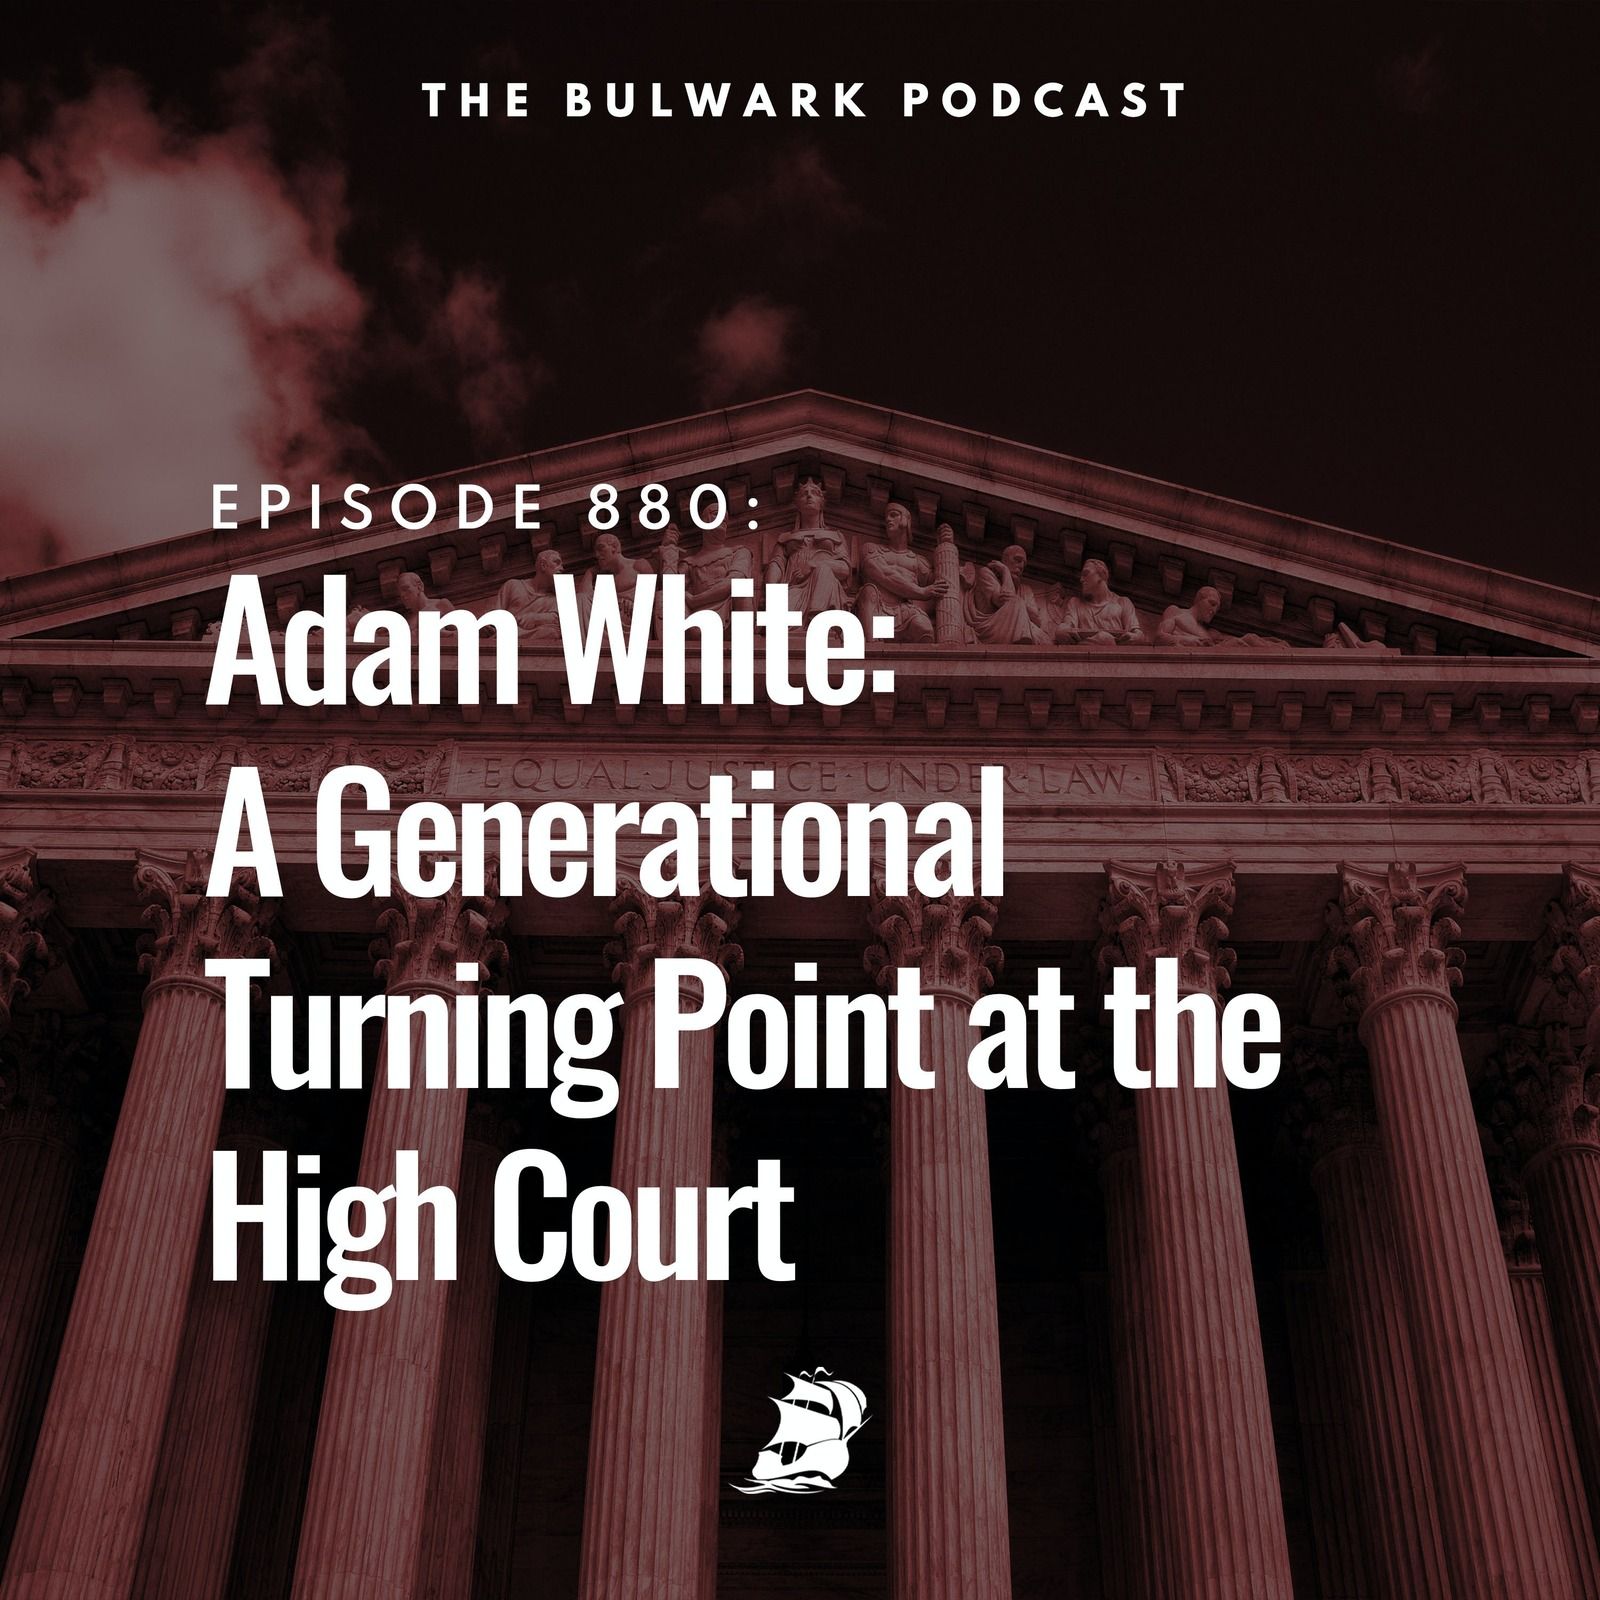 Adam White: A Generational Turning Point at the High Court by The Bulwark Podcast